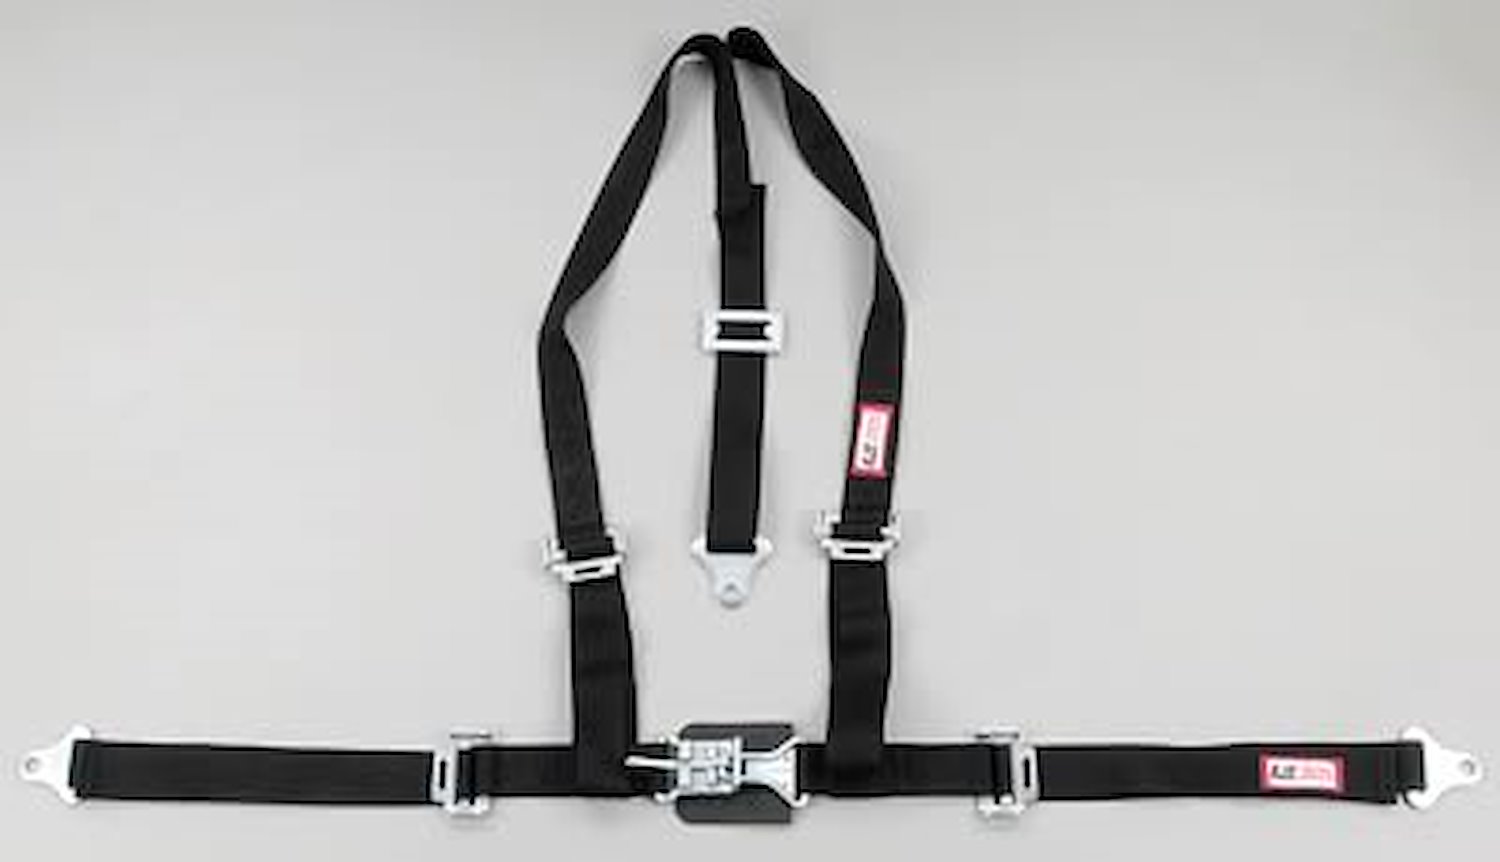 NON-SFI L&L HARNESS 3 PULL DOWN Lap Belt SNAP SEWN IN 2 S.H. Individual ROLL BAR Mount w/STERNUM STRAP WRAP/SNAP BLUE